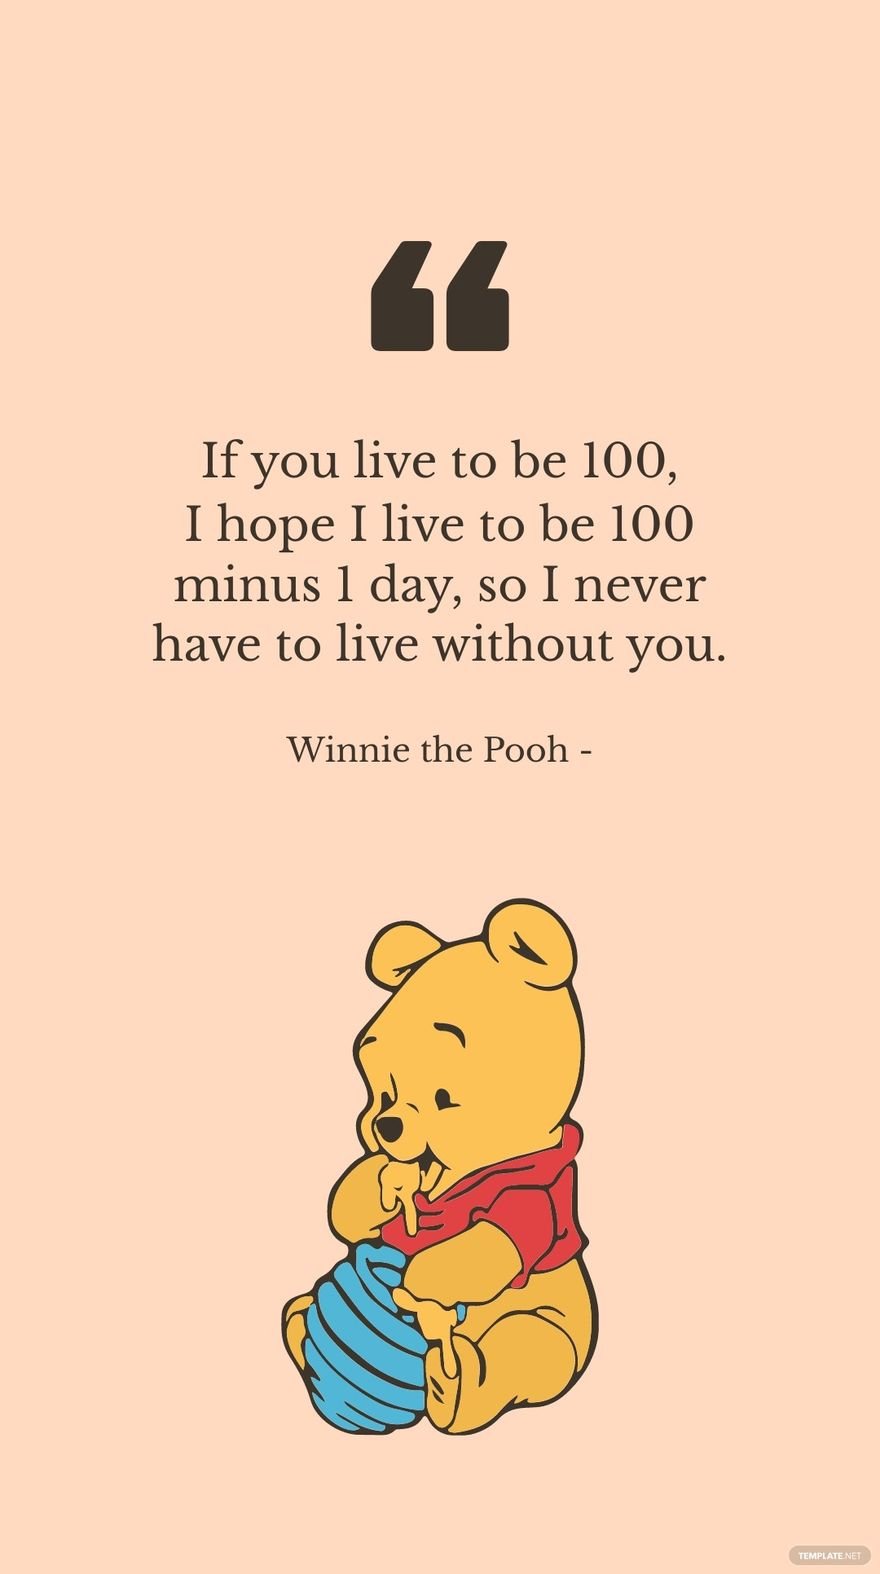 Winnie the Pooh - If you live to be 100, I hope I live to be 100 minus 1 day, so I never have to live without you.